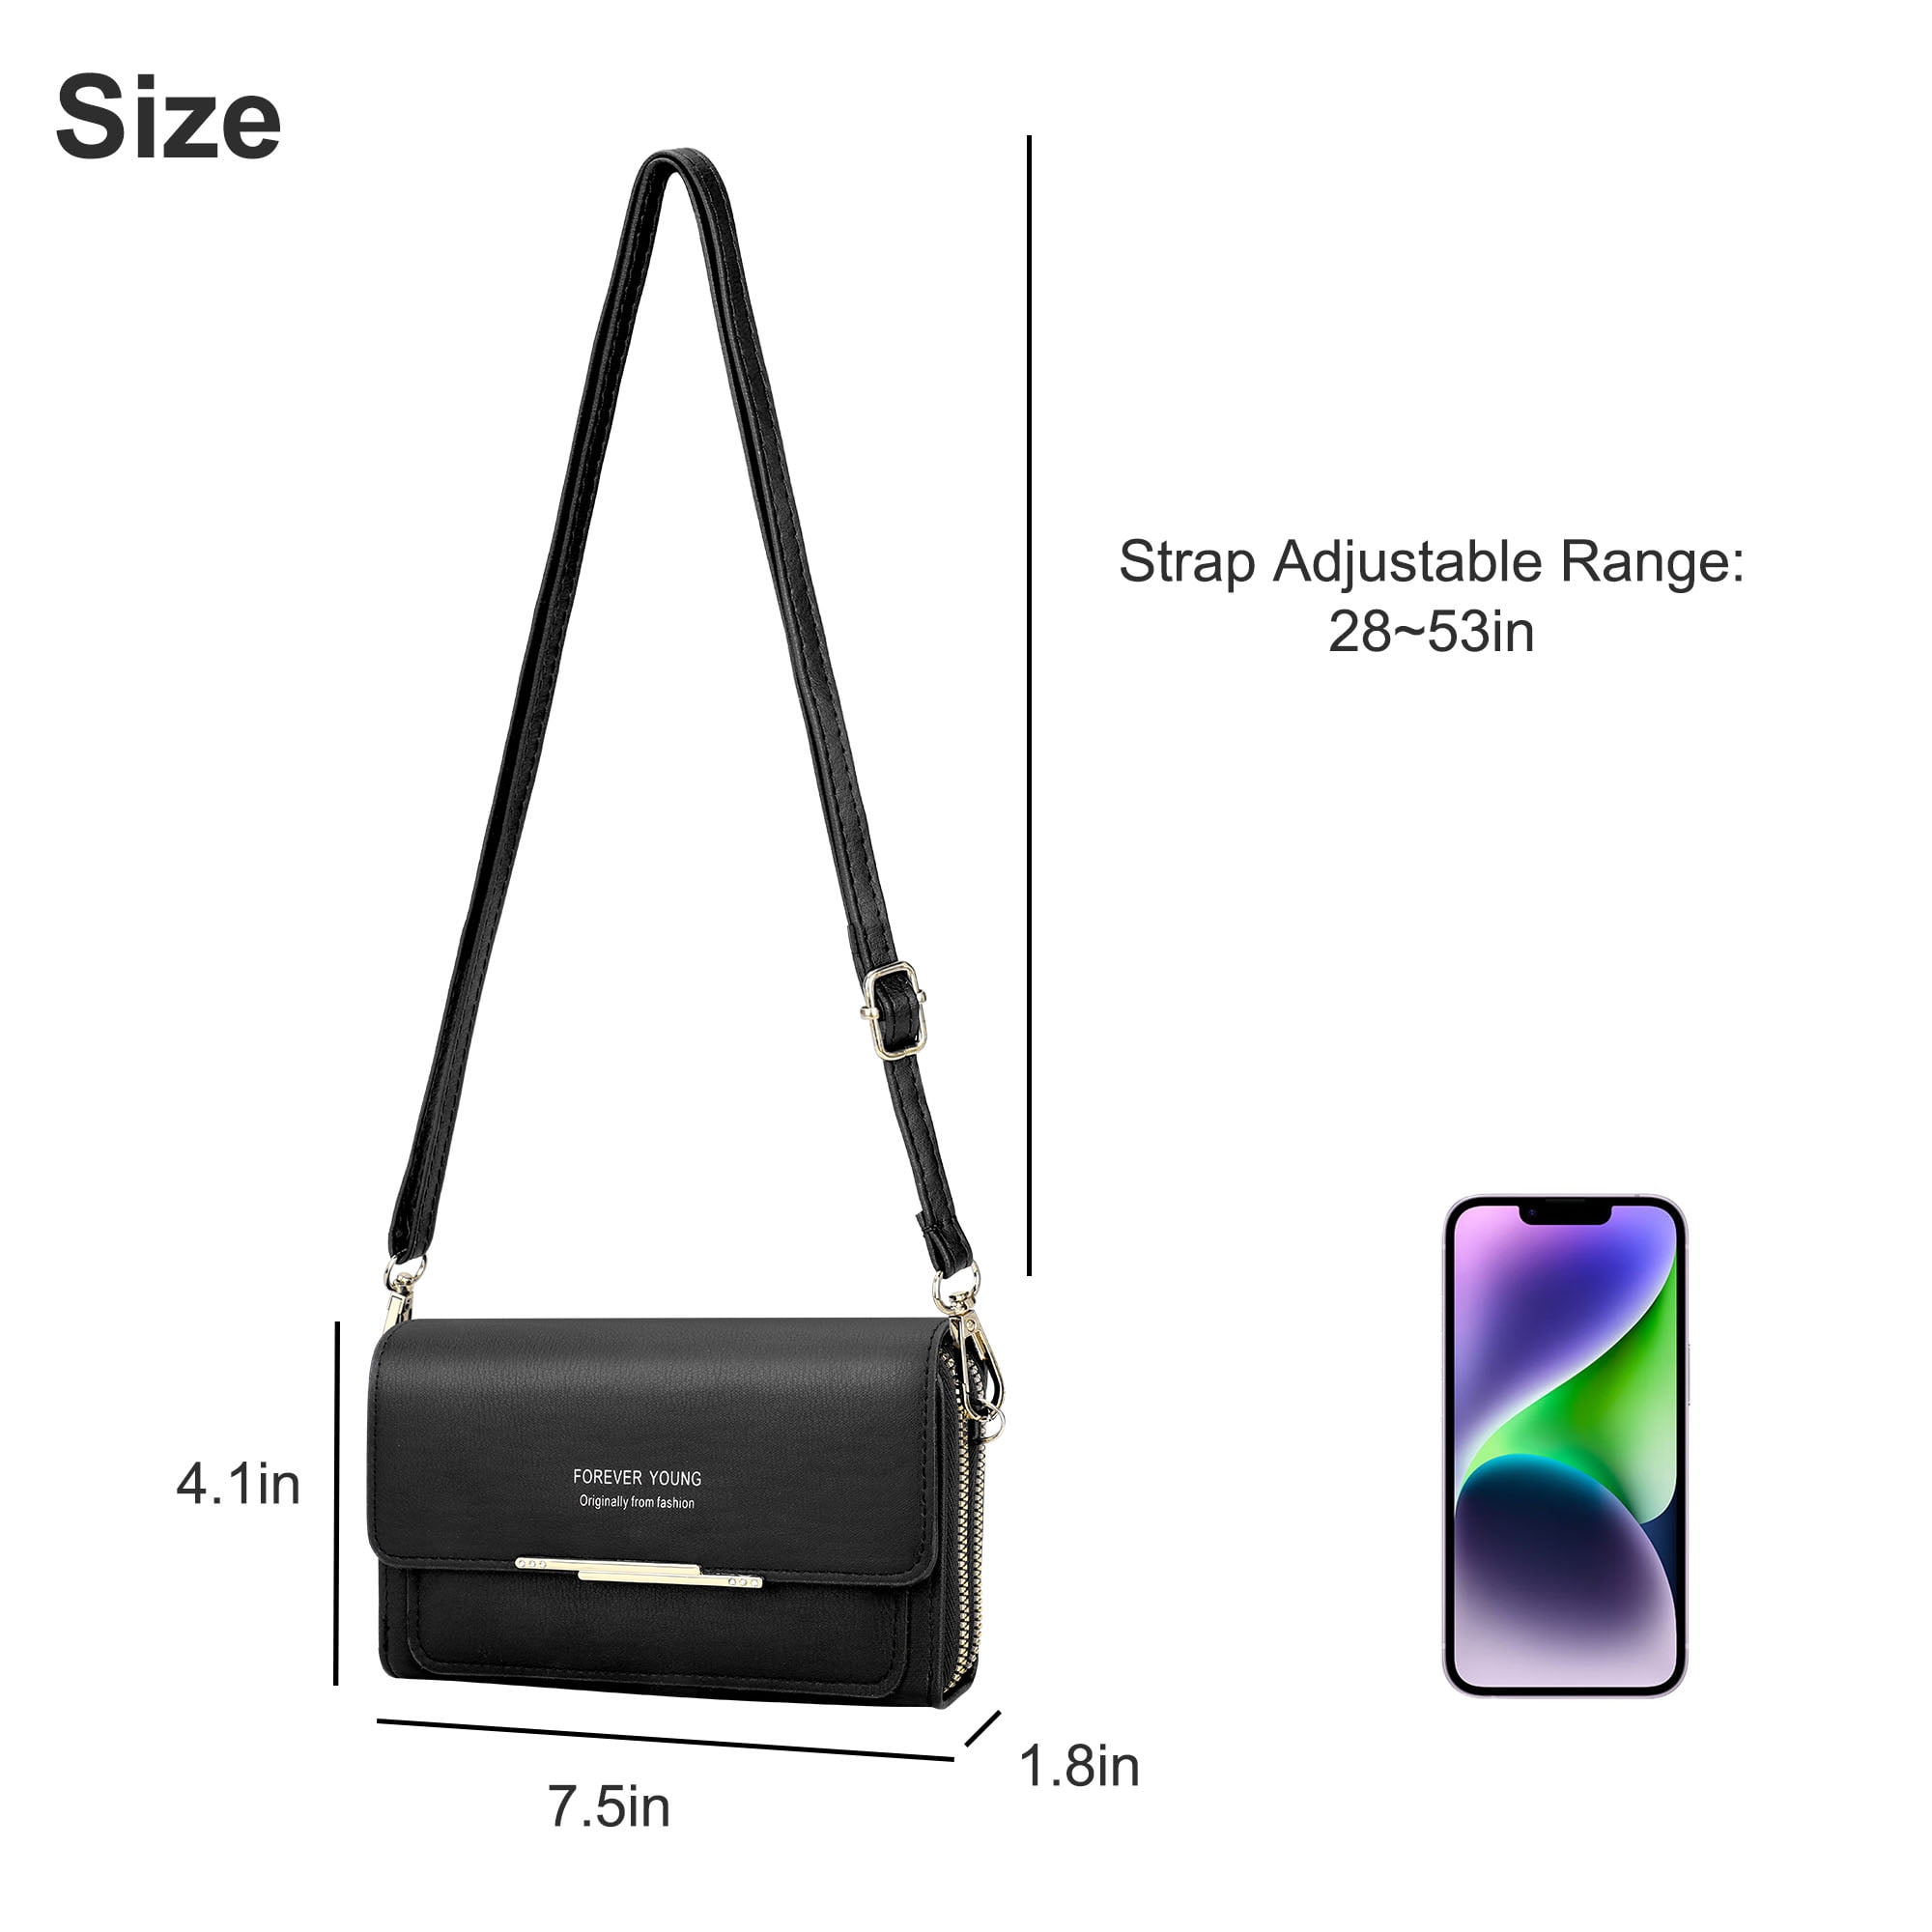 Crossbody Cell Phone Purse, TSV Women's Small Leather Cellphone Shoulder Bag,  Travel Satchel Handbag Fit for iPhone 13 12 11 Pro Max Xs Xr 8 Plus,  Samsung Galaxy Note20 10 S21+ S20 S10E 